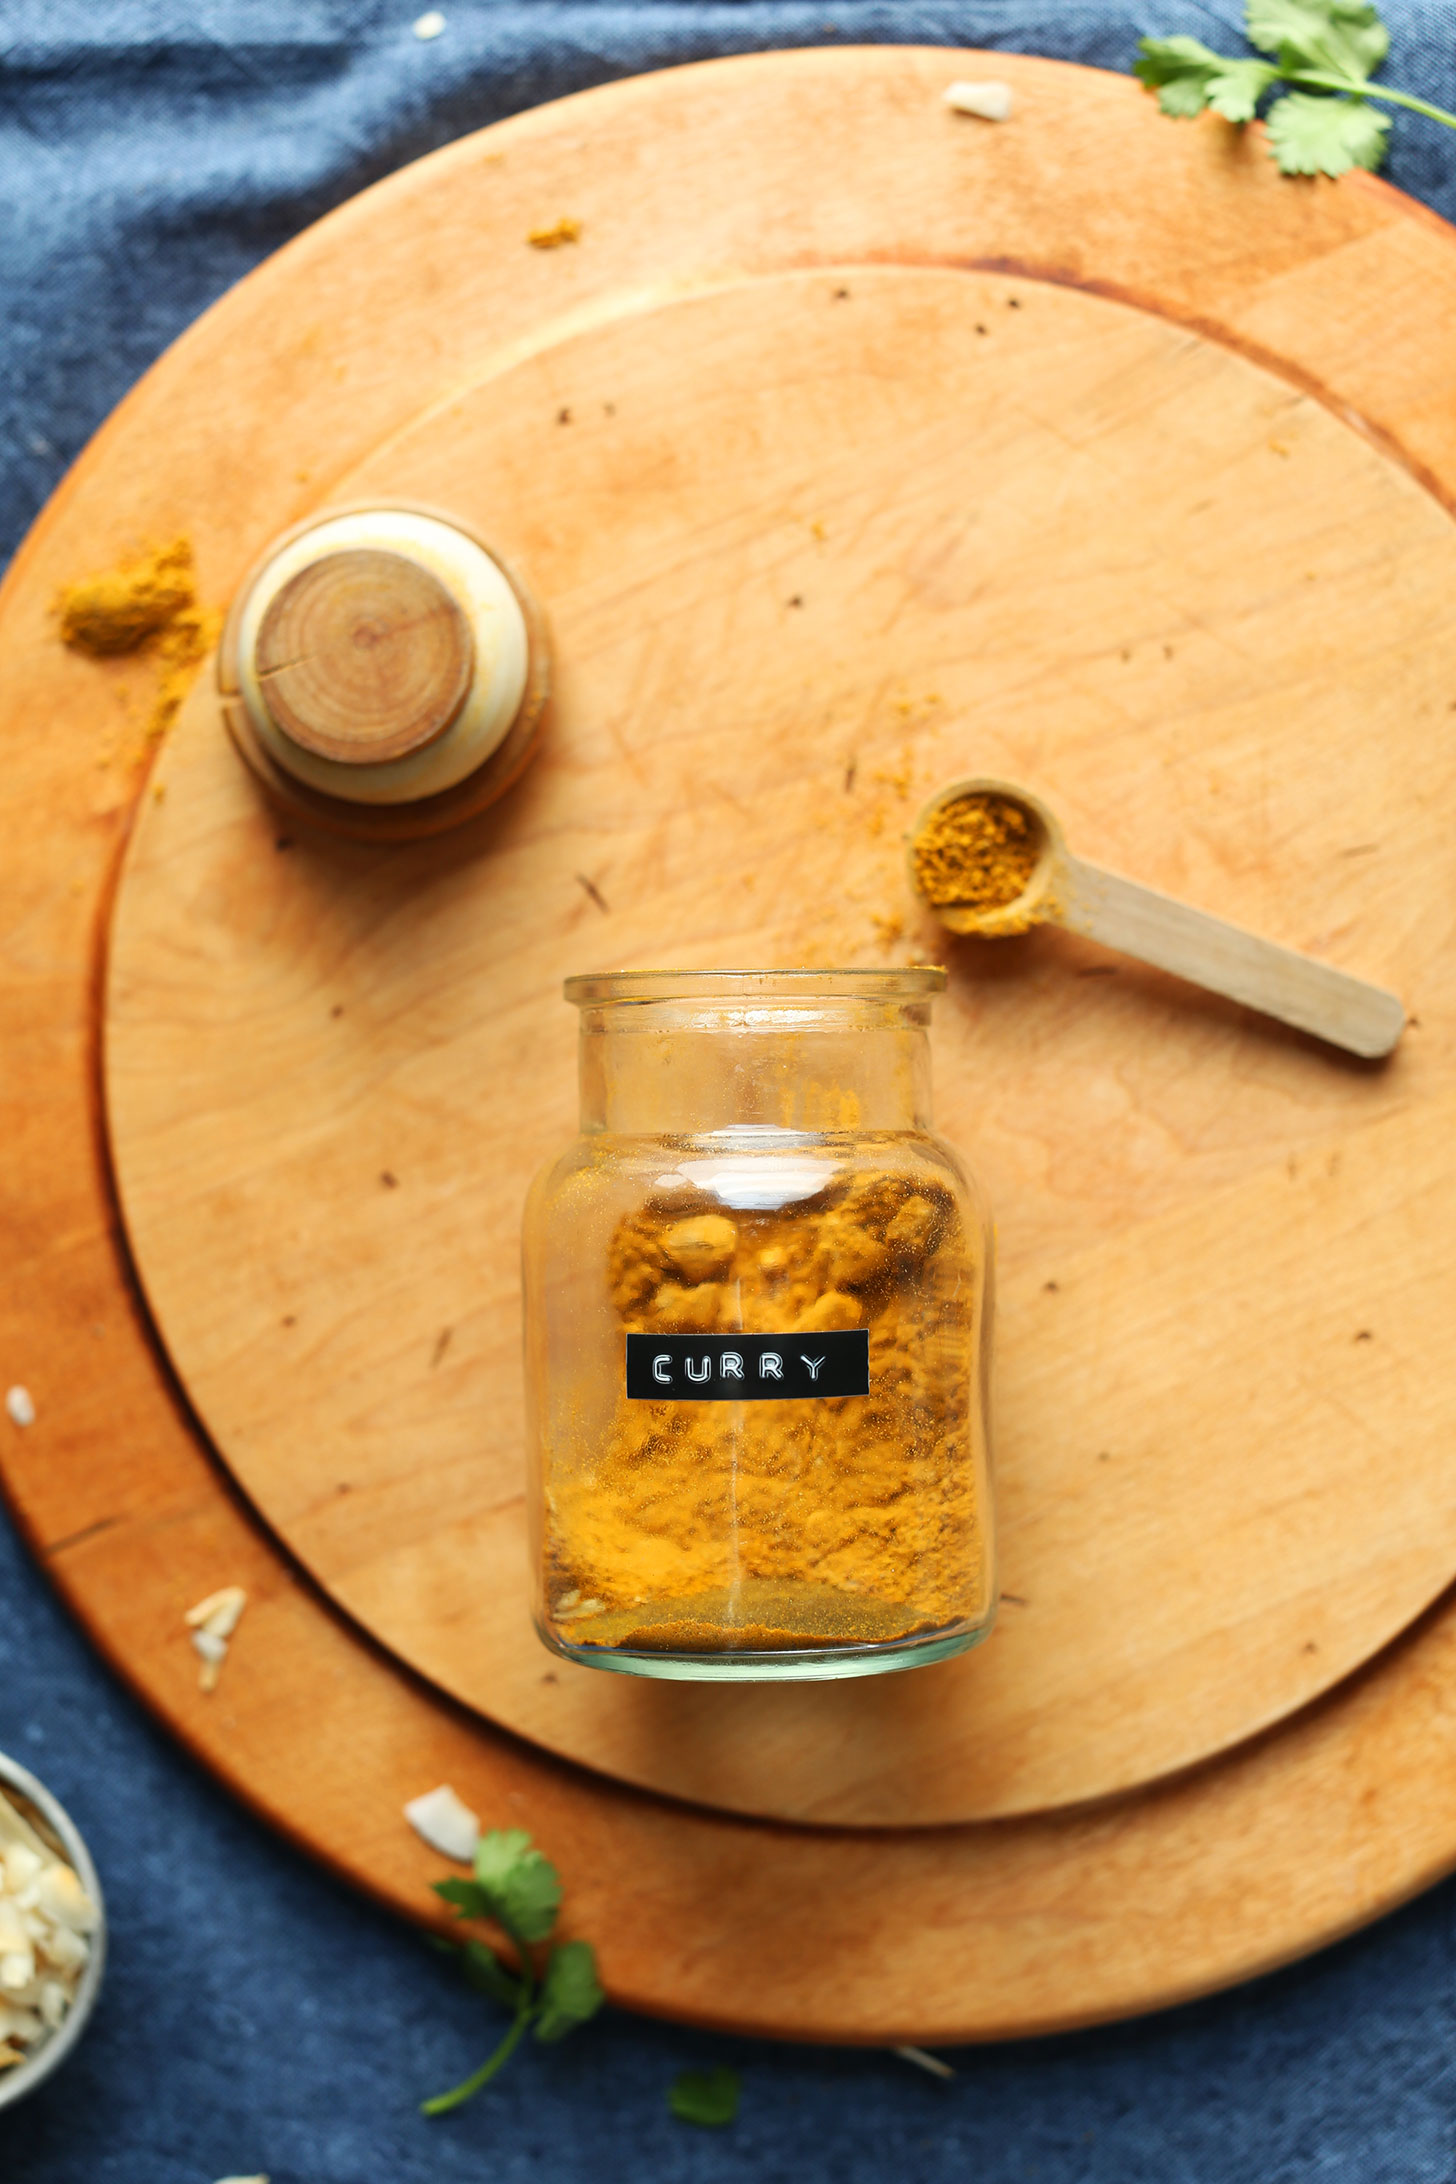 Jar and spoonful of our homemade curry powder